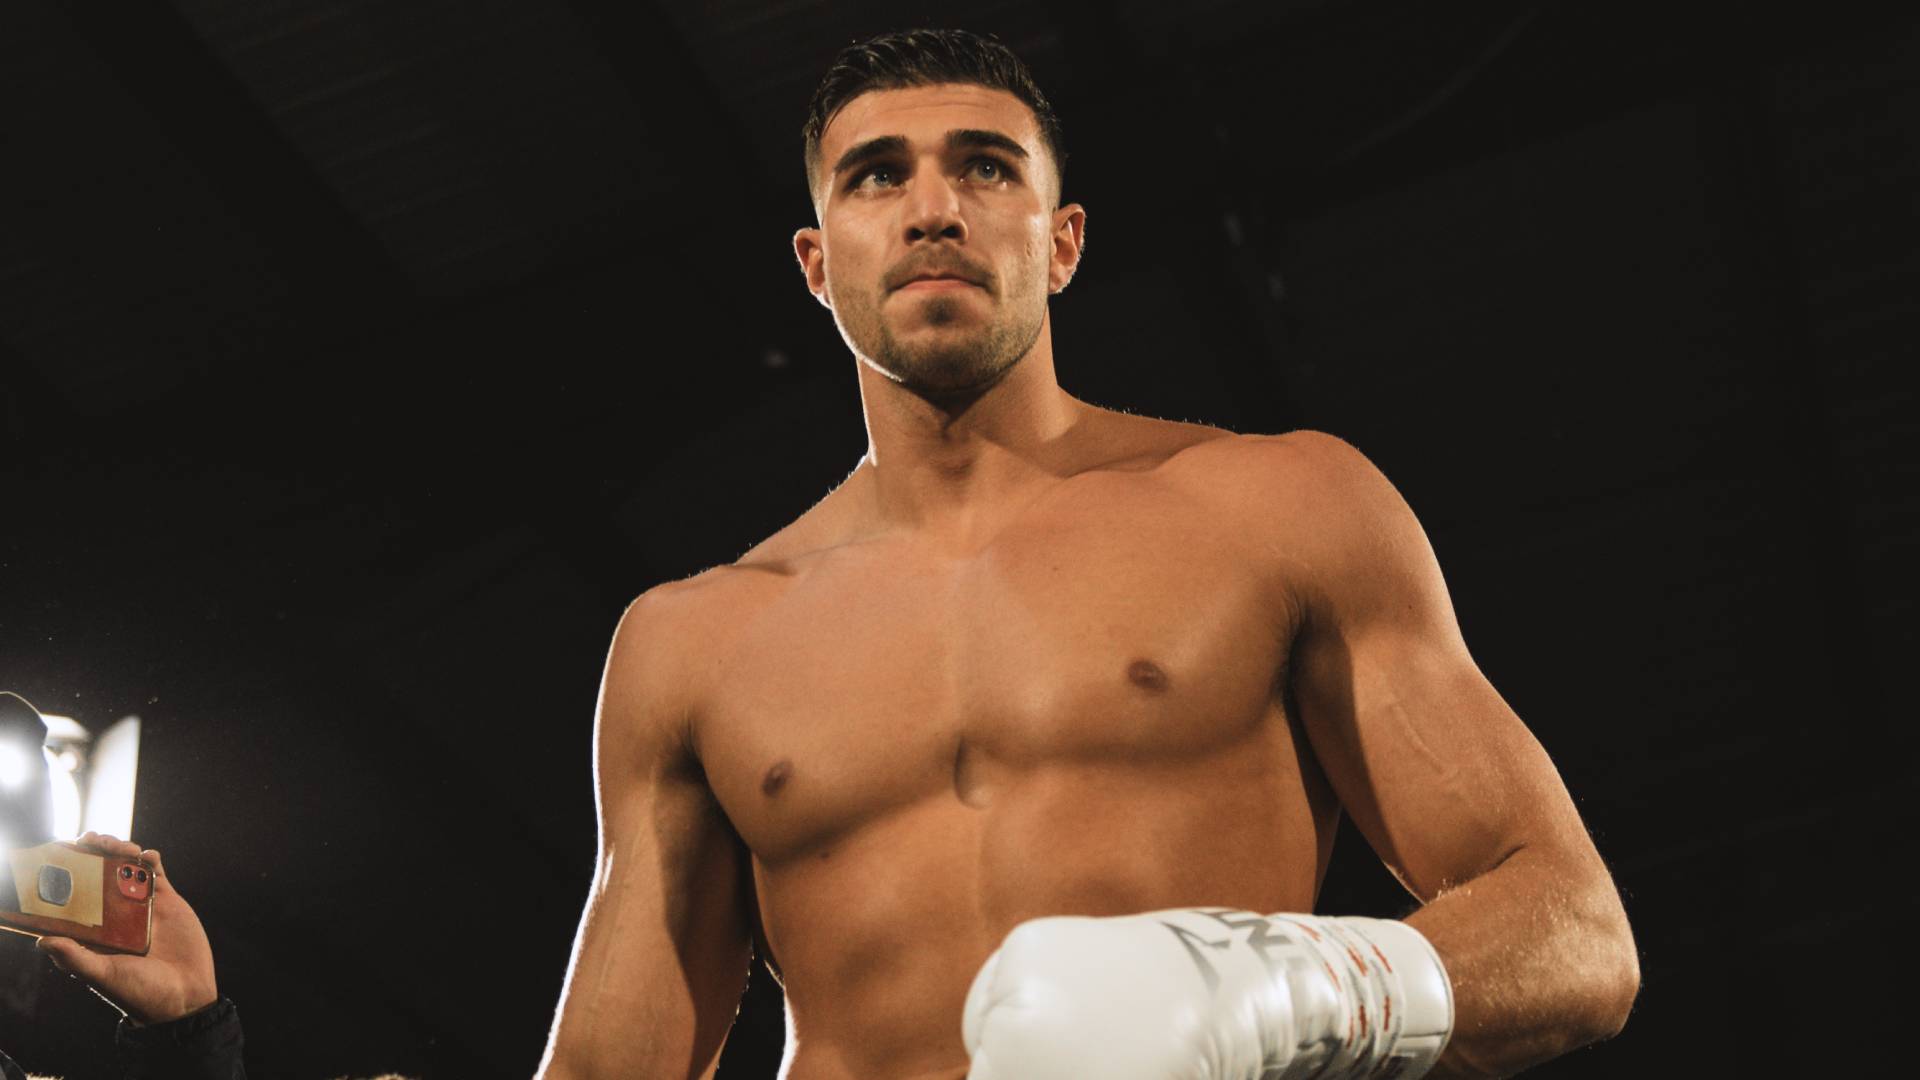 tommy fury answers whether he'd face mike tyson